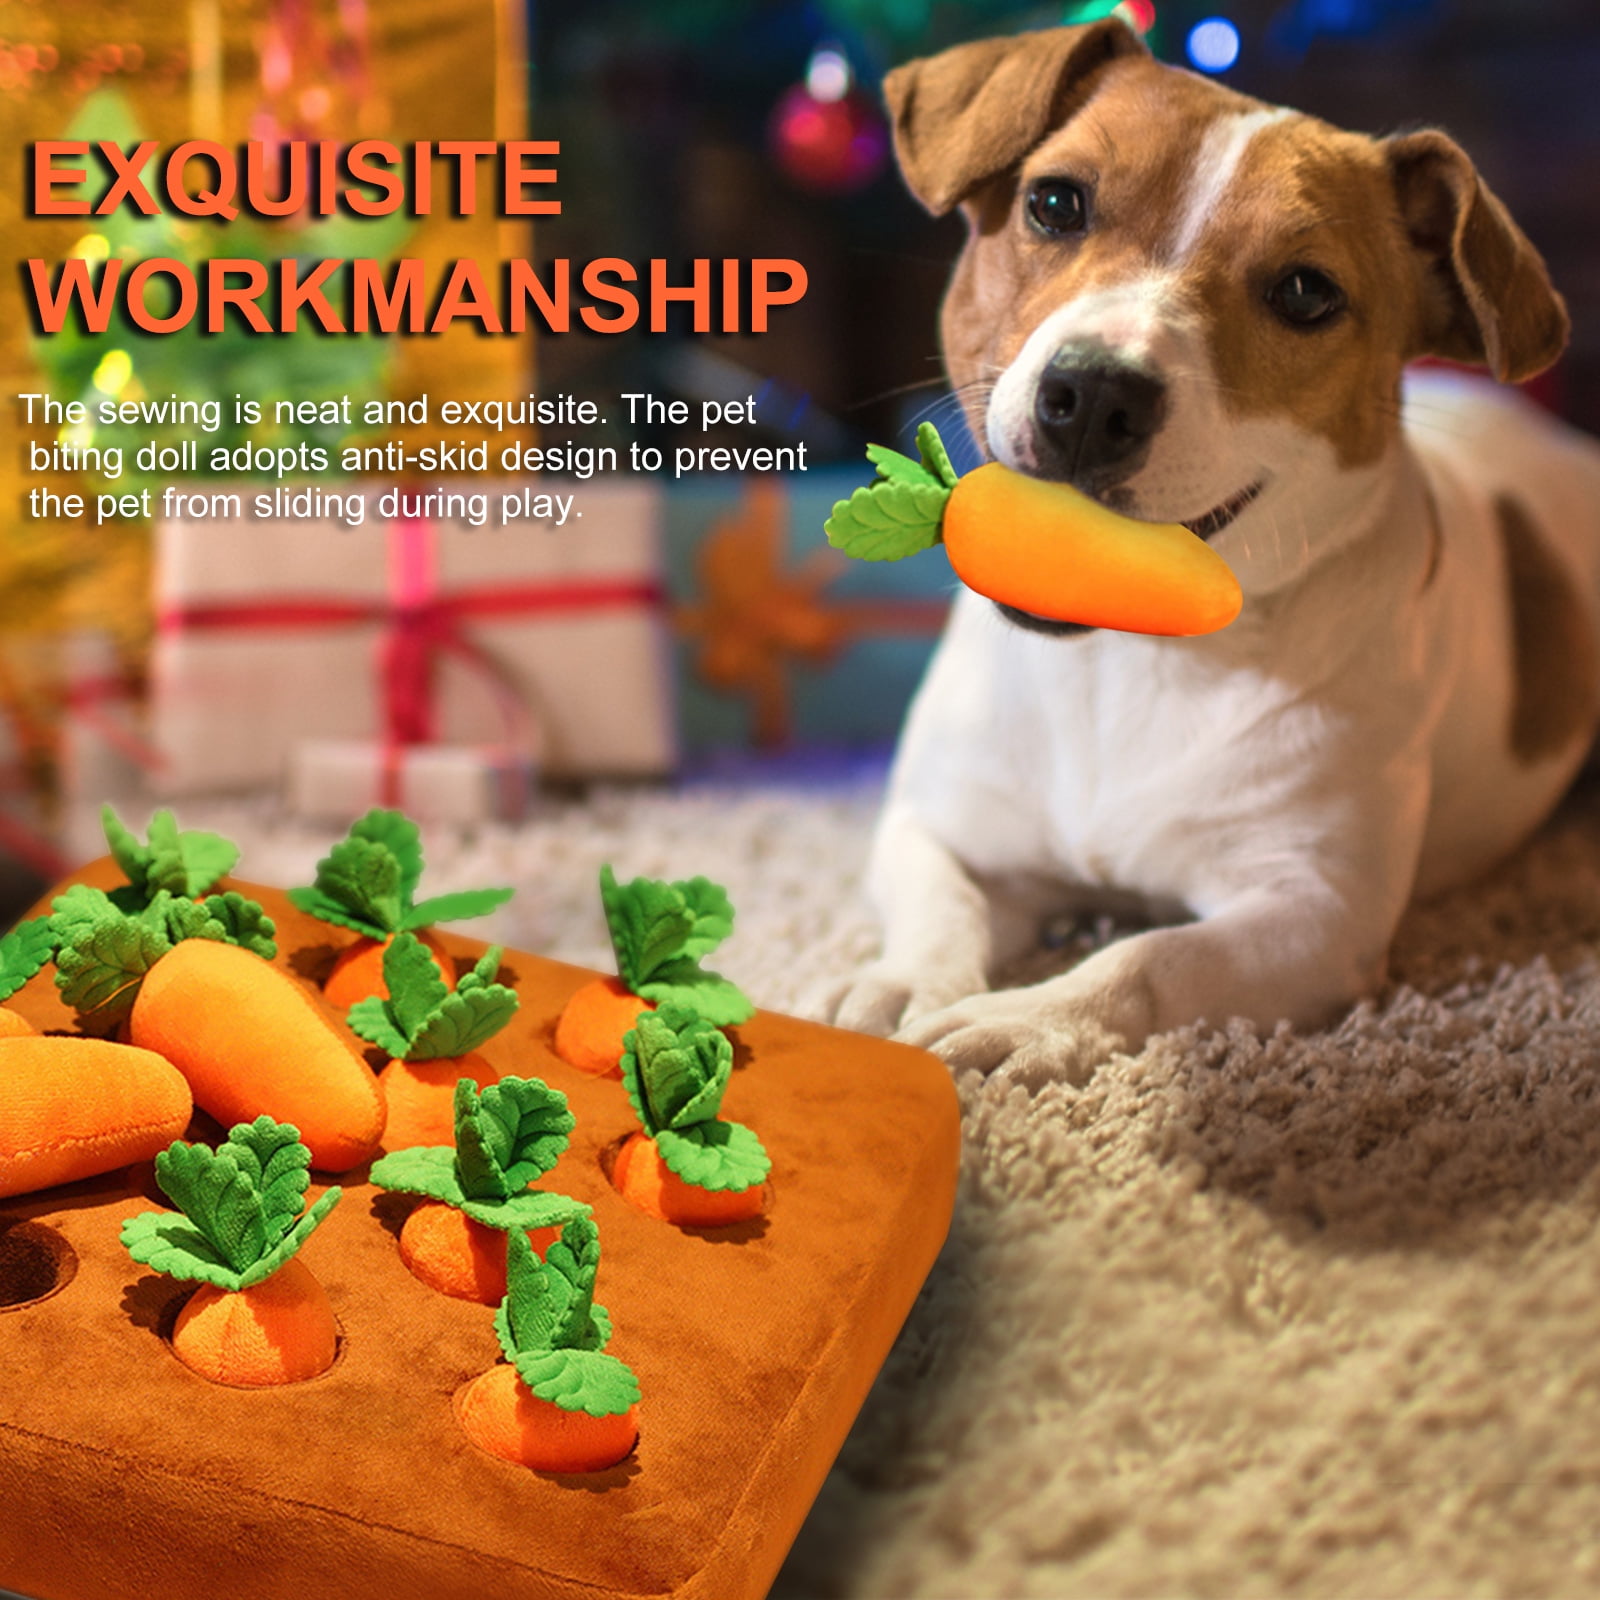 Dog Toy - Puppy Carrot by Modernbeast – The Handmade Showroom